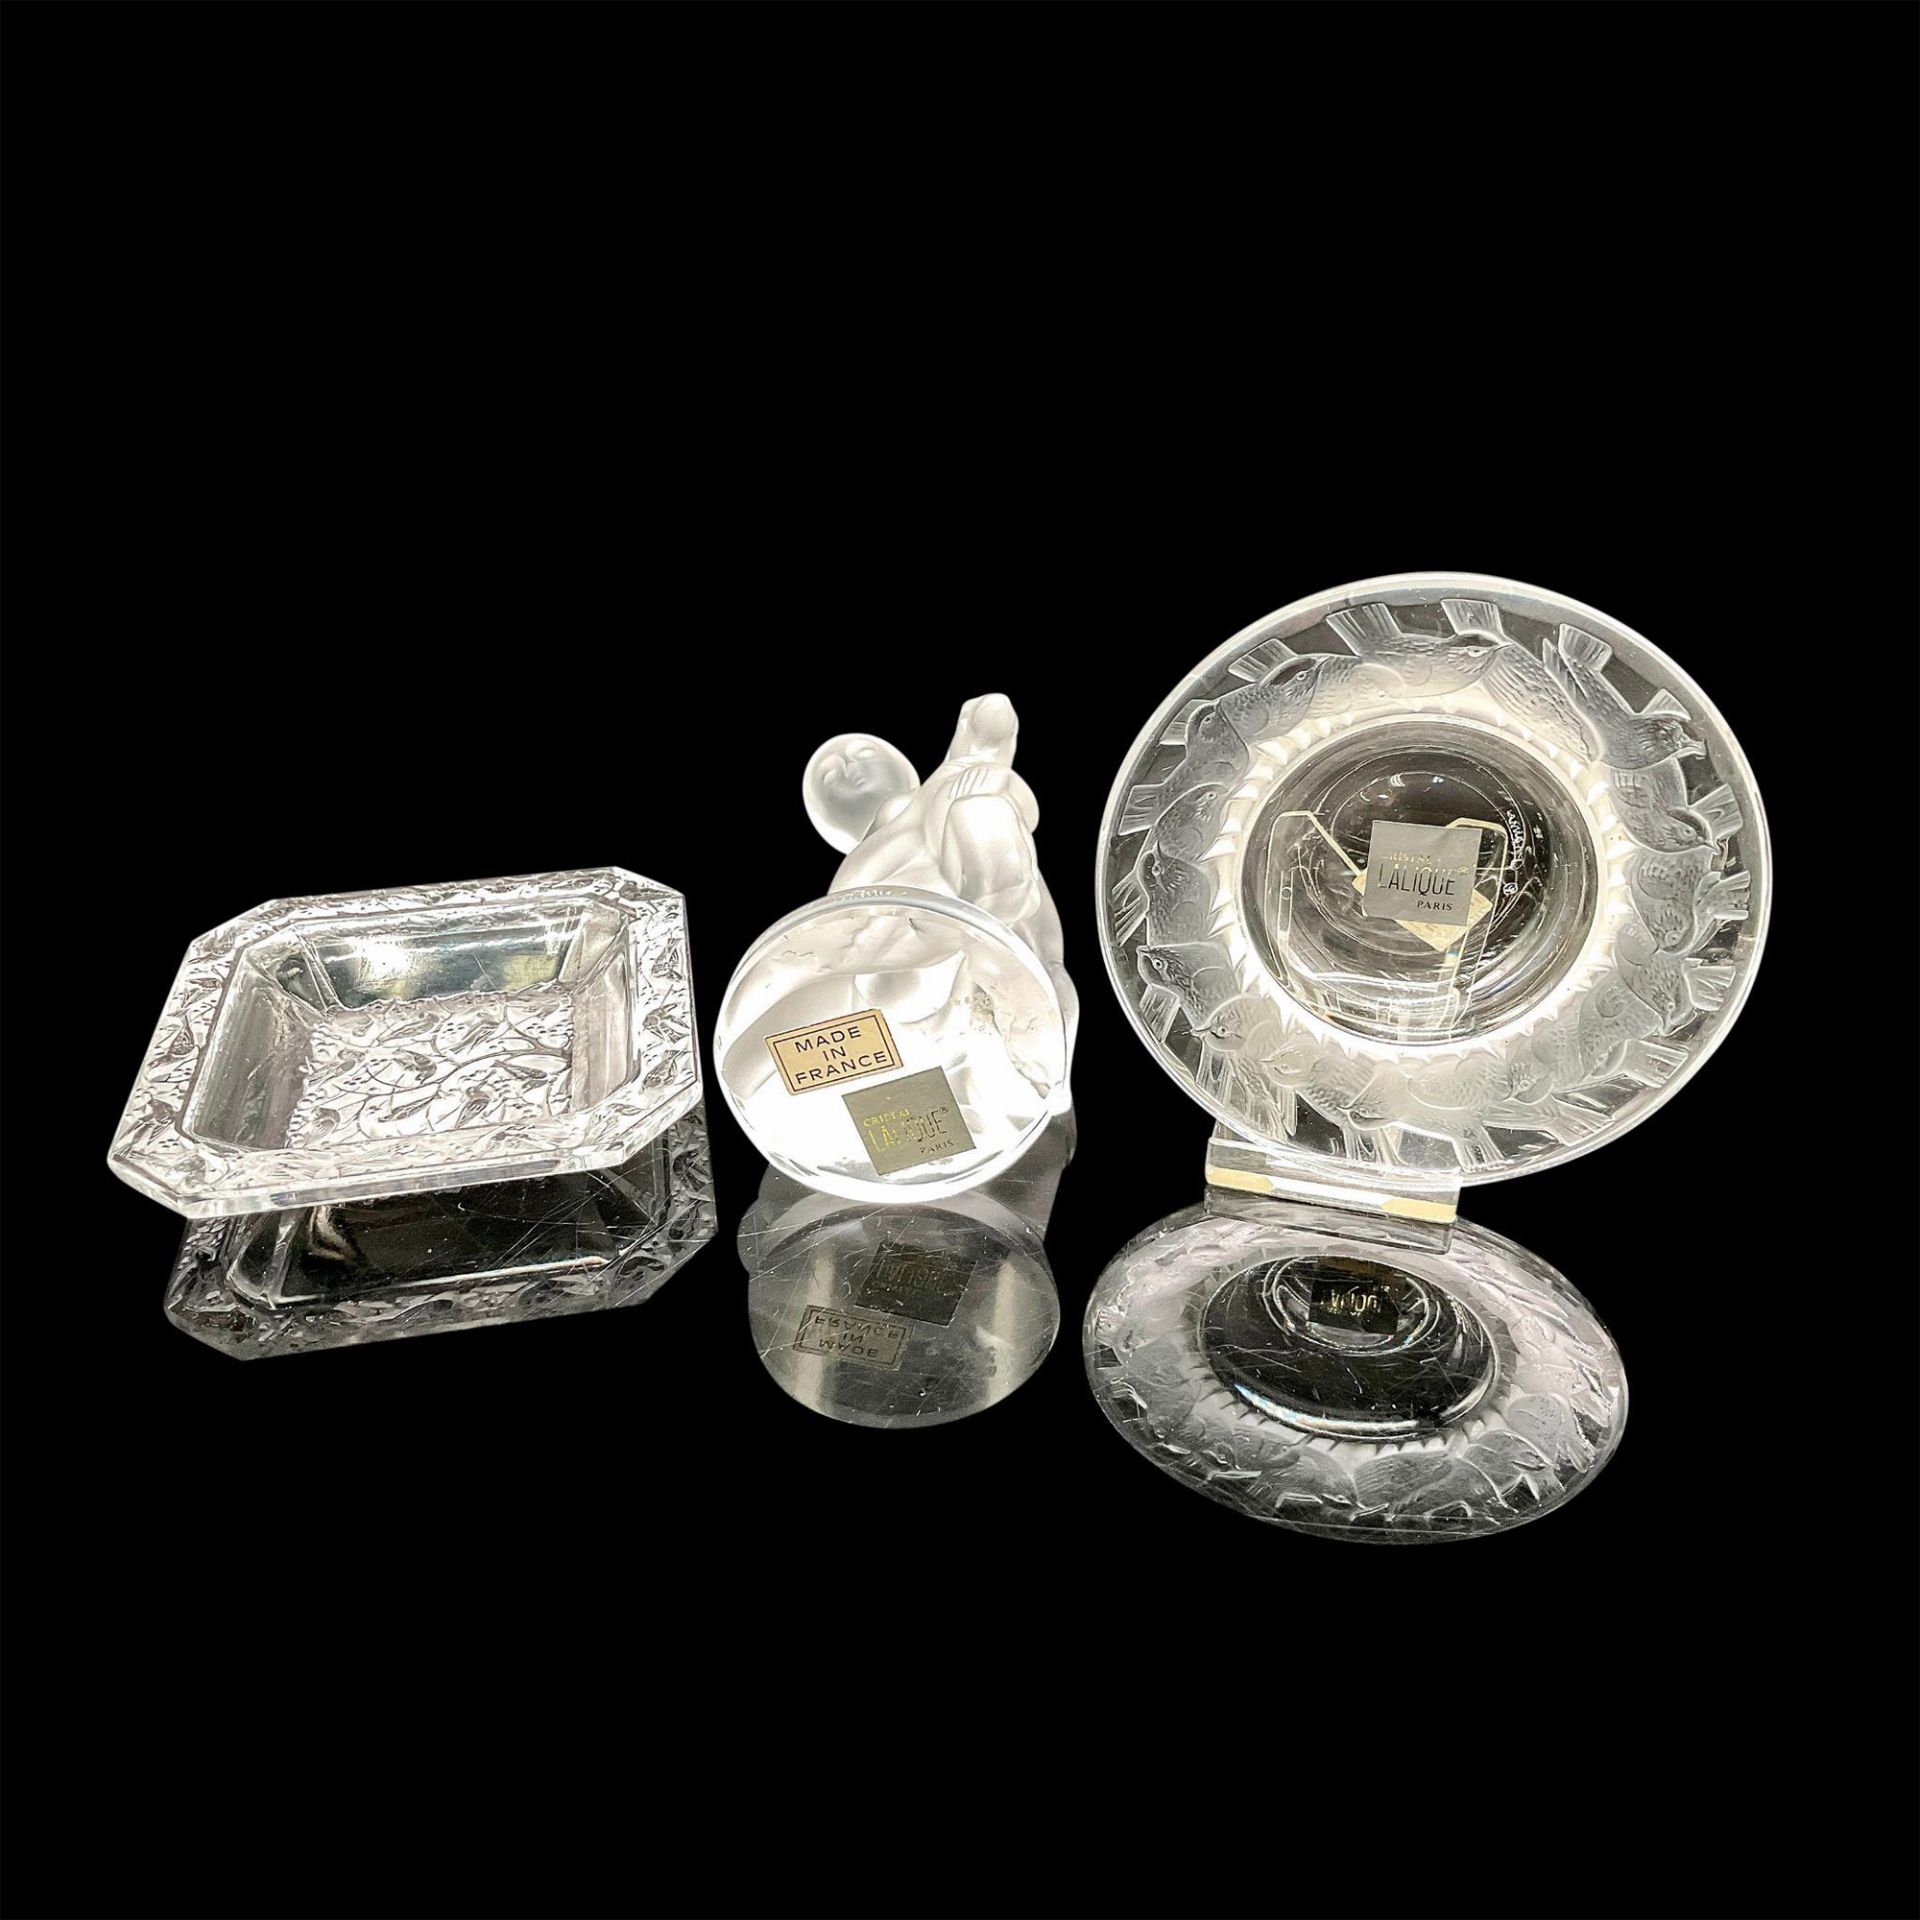 3pc Lalique Crystal Trinket Dishes & Diane Figurine - Image 3 of 3